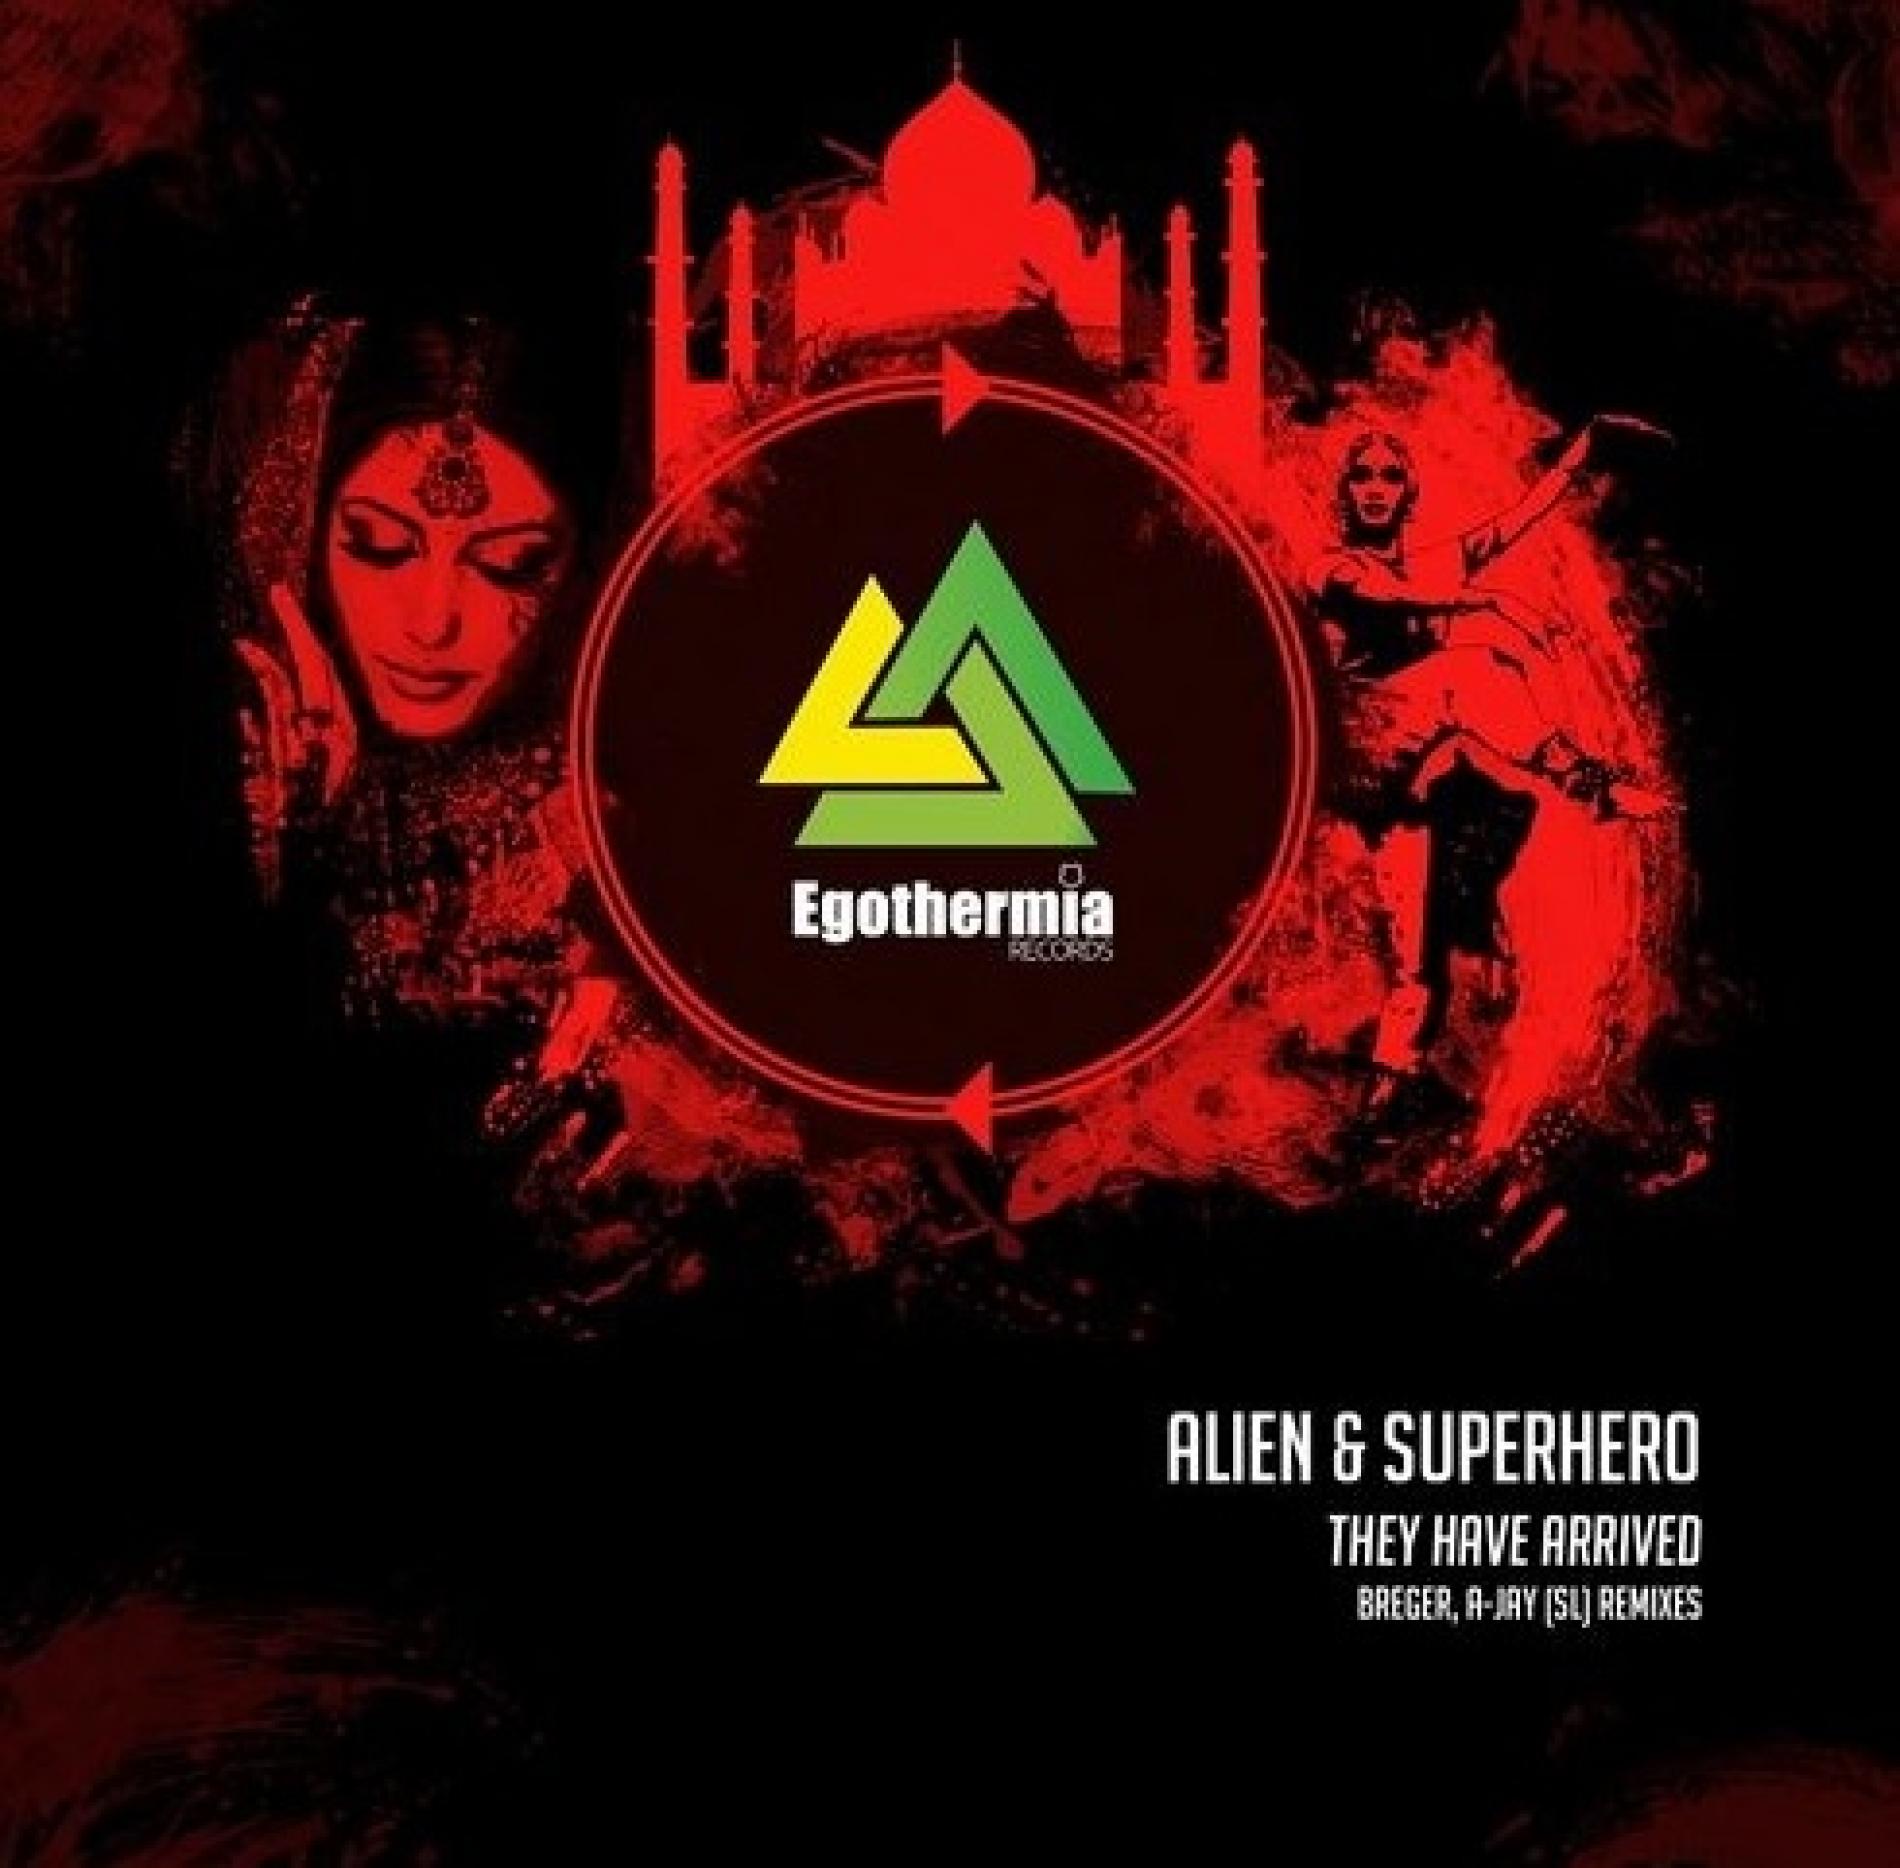 A Jay: Alien and Superhero – They Have Arrived (Remix)